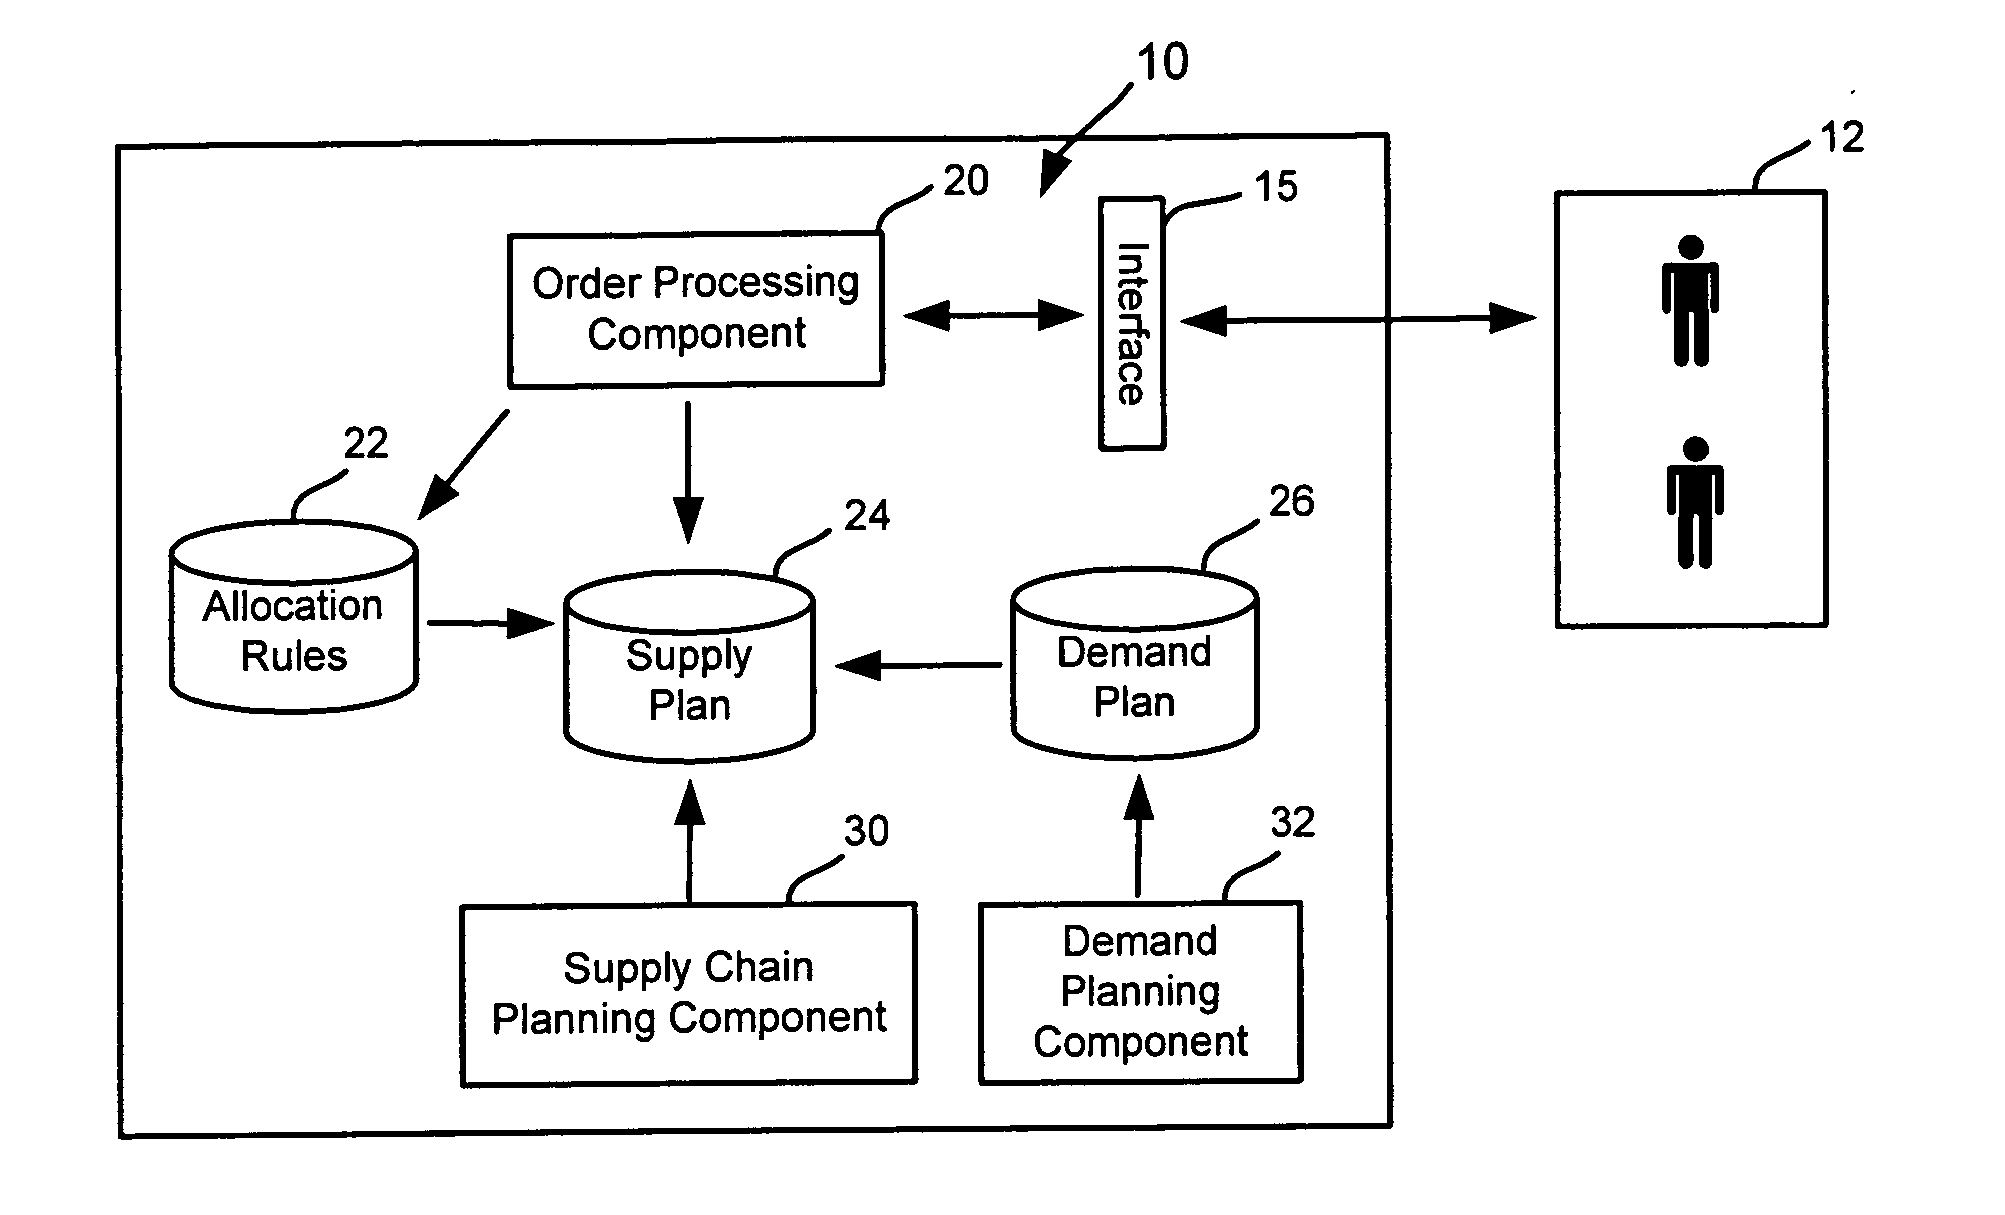 Method for updating the supply plan used by an available-to-promise system